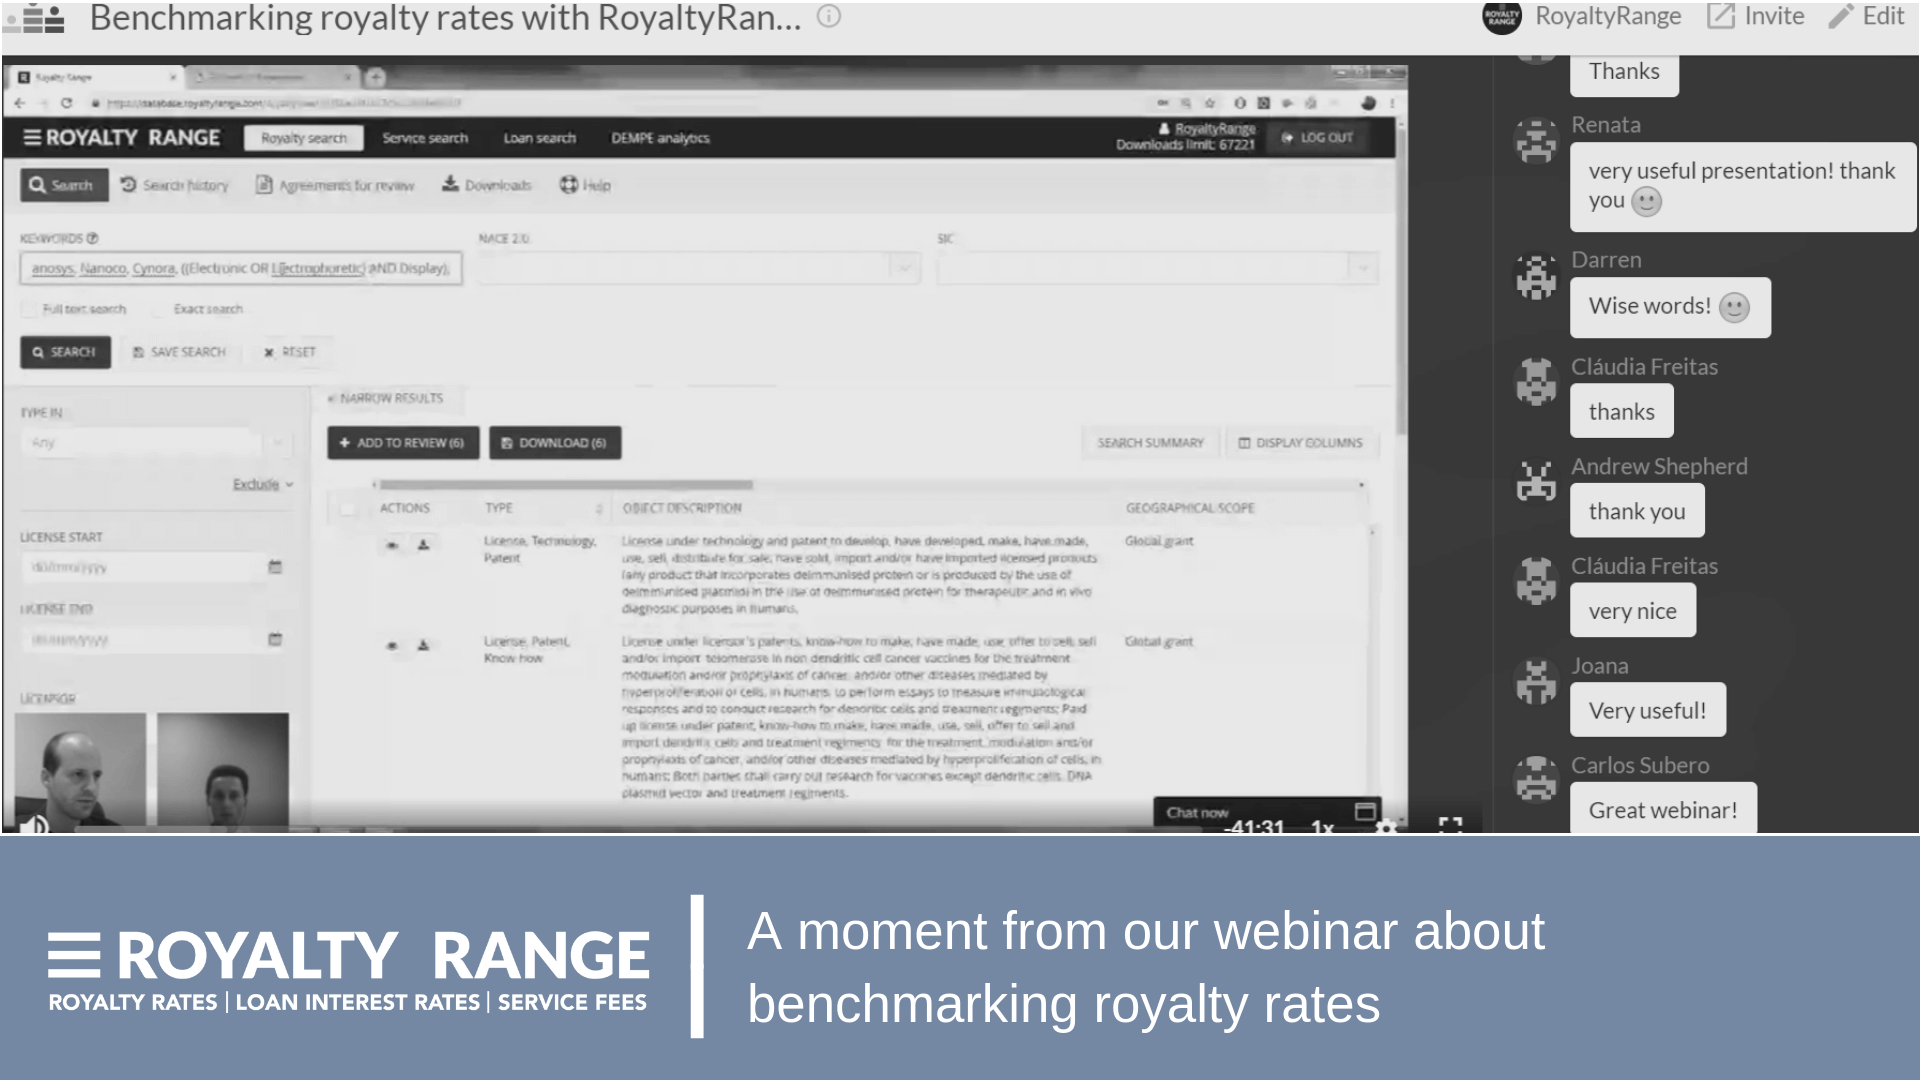 A moment from RoyaltyRange webinar about benchmarking royalty rates